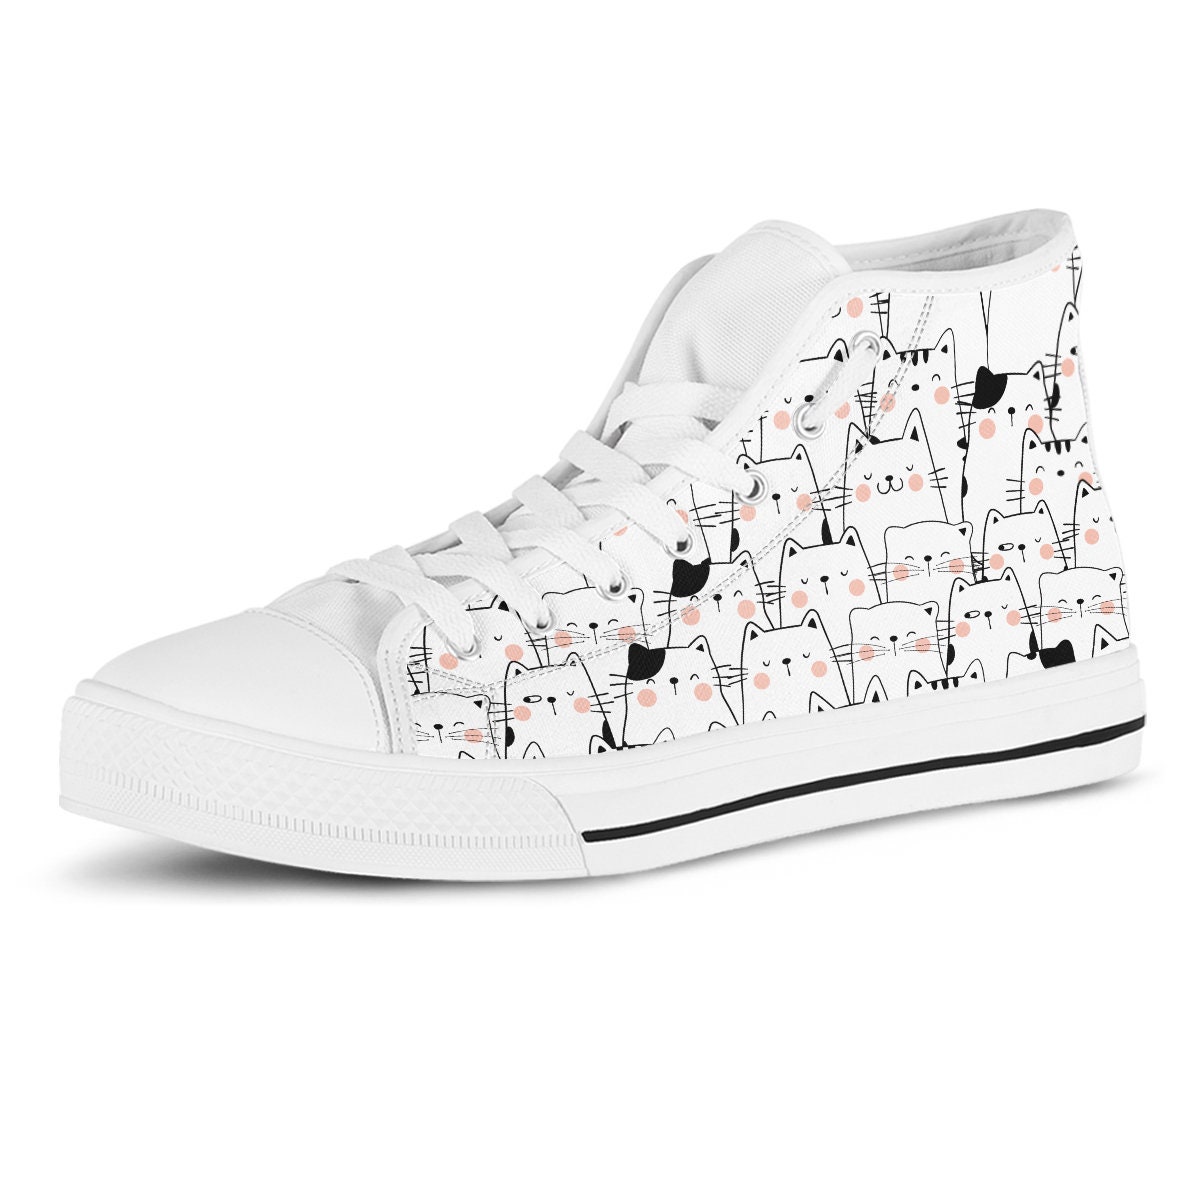 Cute Cat High Top Shoes, Custom Kitty Shoes, Women Sneakers, Cute Sneakers, Kids Sneakers, Women, Men Or Kids Sneakers